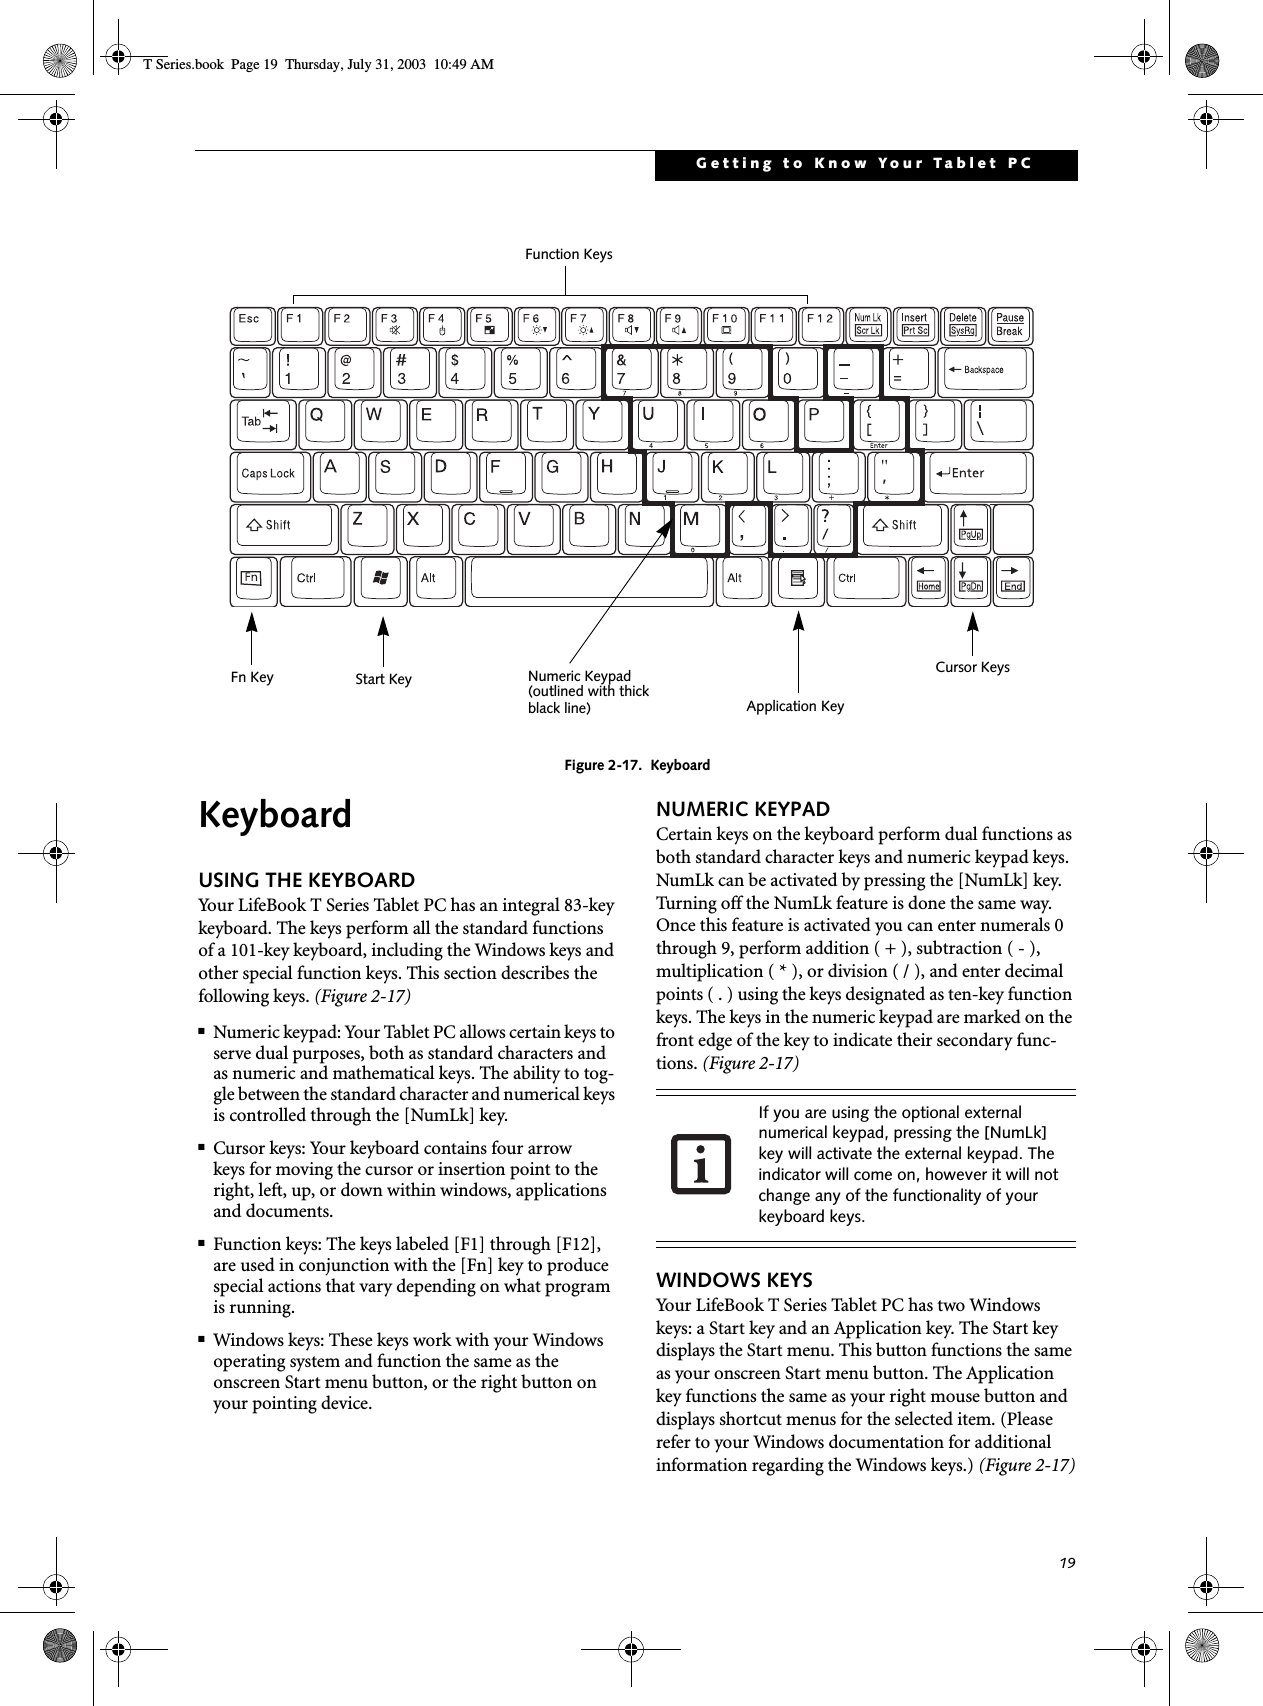 19Getting to Know Your Tablet PCFigure 2-17.  KeyboardKeyboardUSING THE KEYBOARDYour LifeBook T Series Tablet PC has an integral 83-key keyboard. The keys perform all the standard functions of a 101-key keyboard, including the Windows keys and other special function keys. This section describes the following keys. (Figure 2-17)■Numeric keypad: Your Tablet PC allows certain keys to serve dual purposes, both as standard characters and as numeric and mathematical keys. The ability to tog-gle between the standard character and numerical keys is controlled through the [NumLk] key.■Cursor keys: Your keyboard contains four arrowkeys for moving the cursor or insertion point to the right, left, up, or down within windows, applications and documents. ■Function keys: The keys labeled [F1] through [F12], are used in conjunction with the [Fn] key to produce special actions that vary depending on what program is running. ■Windows keys: These keys work with your Windows operating system and function the same as the onscreen Start menu button, or the right button on your pointing device.NUMERIC KEYPADCertain keys on the keyboard perform dual functions as both standard character keys and numeric keypad keys. NumLk can be activated by pressing the [NumLk] key. Turning off the NumLk feature is done the same way. Once this feature is activated you can enter numerals 0 through 9, perform addition ( + ), subtraction ( - ),multiplication ( * ), or division ( / ), and enter decimal points ( . ) using the keys designated as ten-key function keys. The keys in the numeric keypad are marked on the front edge of the key to indicate their secondary func-tions. (Figure 2-17) WINDOWS KEYSYour LifeBook T Series Tablet PC has two Windows keys: a Start key and an Application key. The Start key displays the Start menu. This button functions the same as your onscreen Start menu button. The Application key functions the same as your right mouse button and displays shortcut menus for the selected item. (Please refer to your Windows documentation for additional information regarding the Windows keys.) (Figure 2-17)Fn Key Start KeyFunction KeysNumeric KeypadApplication KeyCursor Keys(outlined with thickblack line)If you are using the optional external numerical keypad, pressing the [NumLk] key will activate the external keypad. The indicator will come on, however it will not change any of the functionality of your keyboard keys. T Series.book  Page 19  Thursday, July 31, 2003  10:49 AM